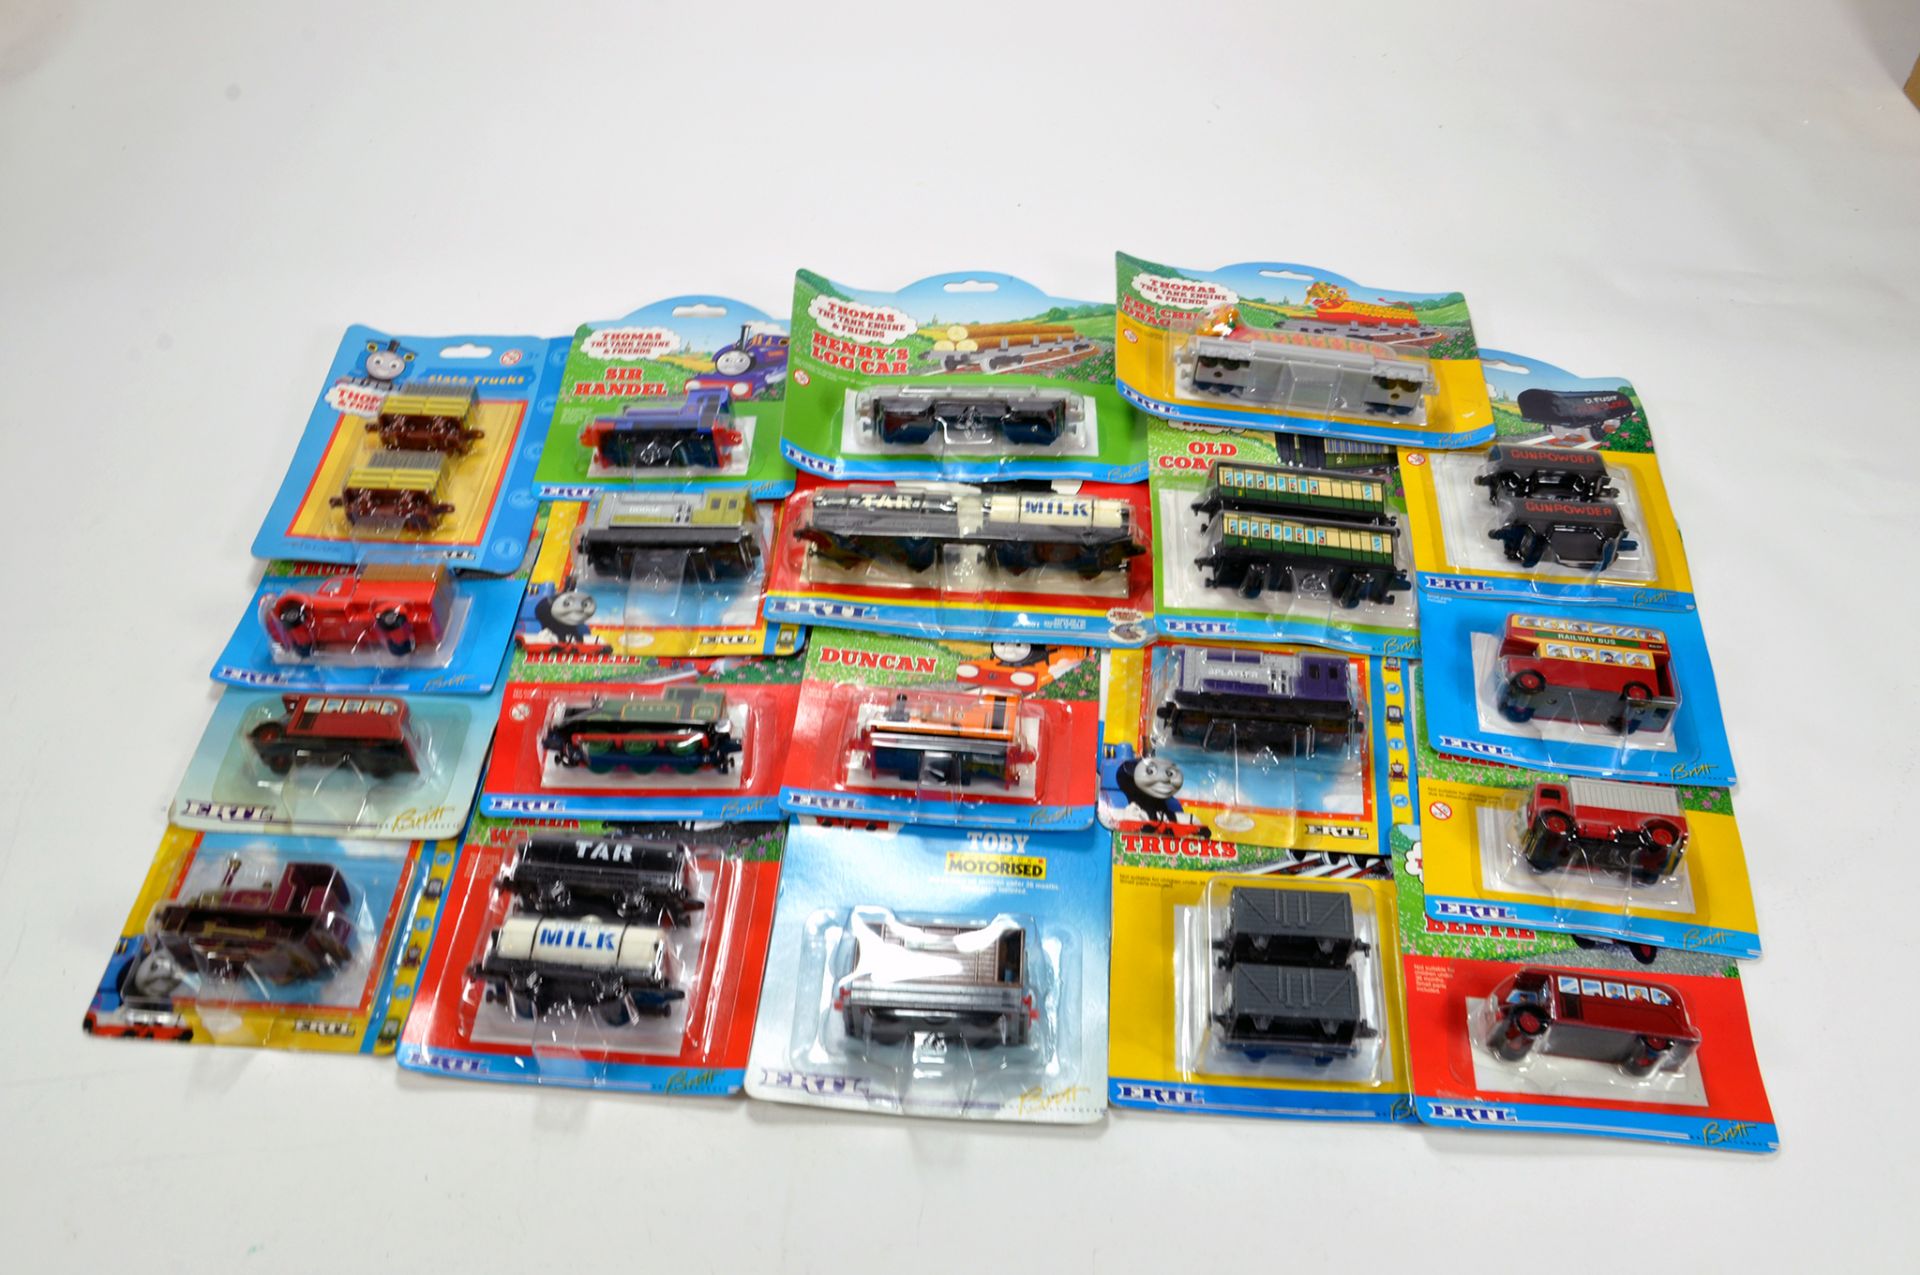 Ex Shop Assortment of Thomas the Tank Engine diecast toys from Ertl including some harder to find